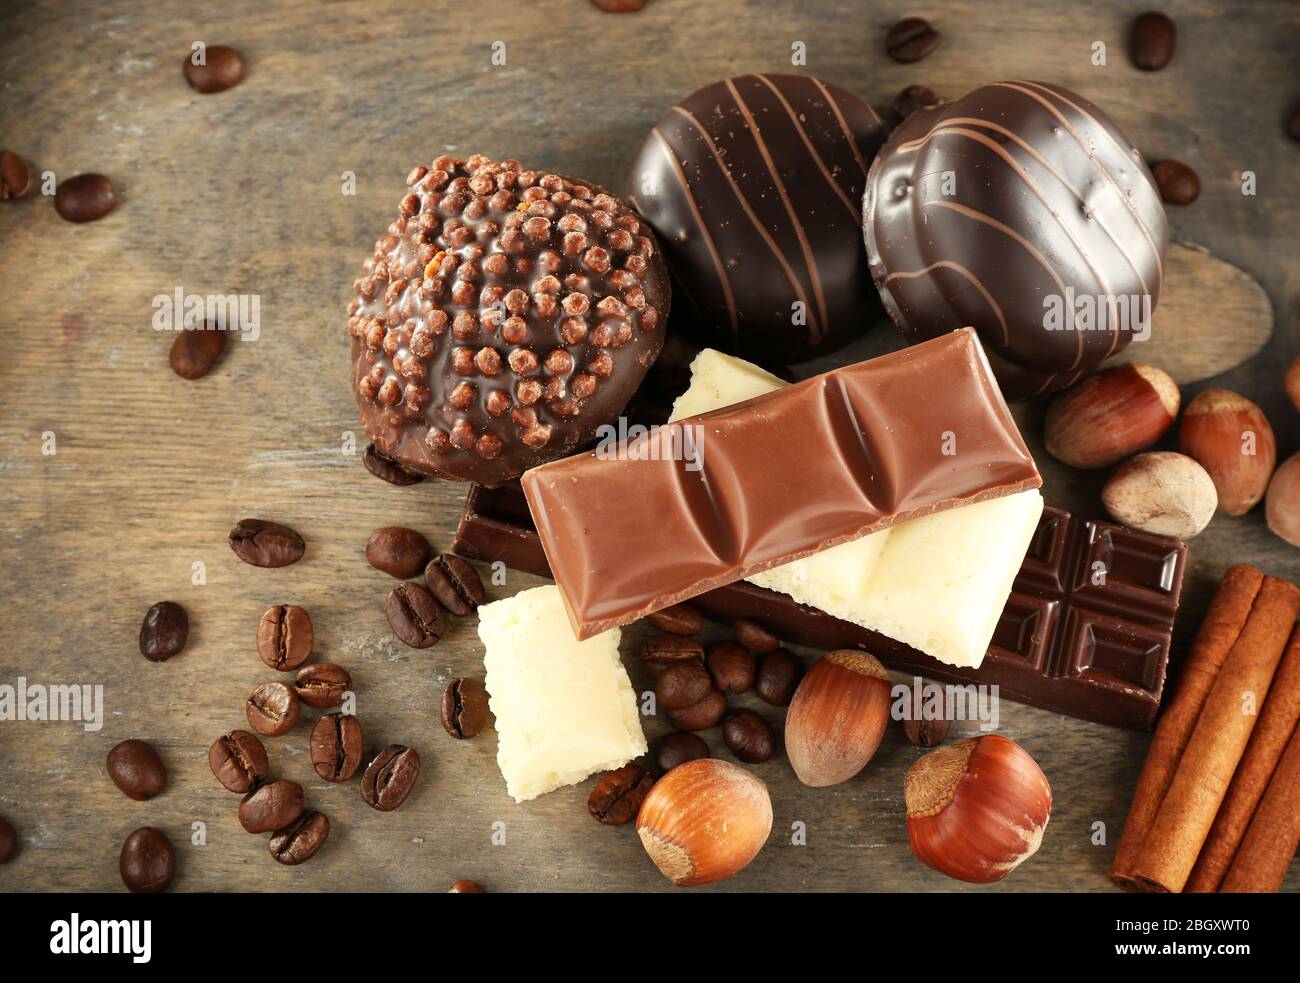 Chocolate cookies with coffee beans, nuts and cinnamon on wooden background Stock Photo